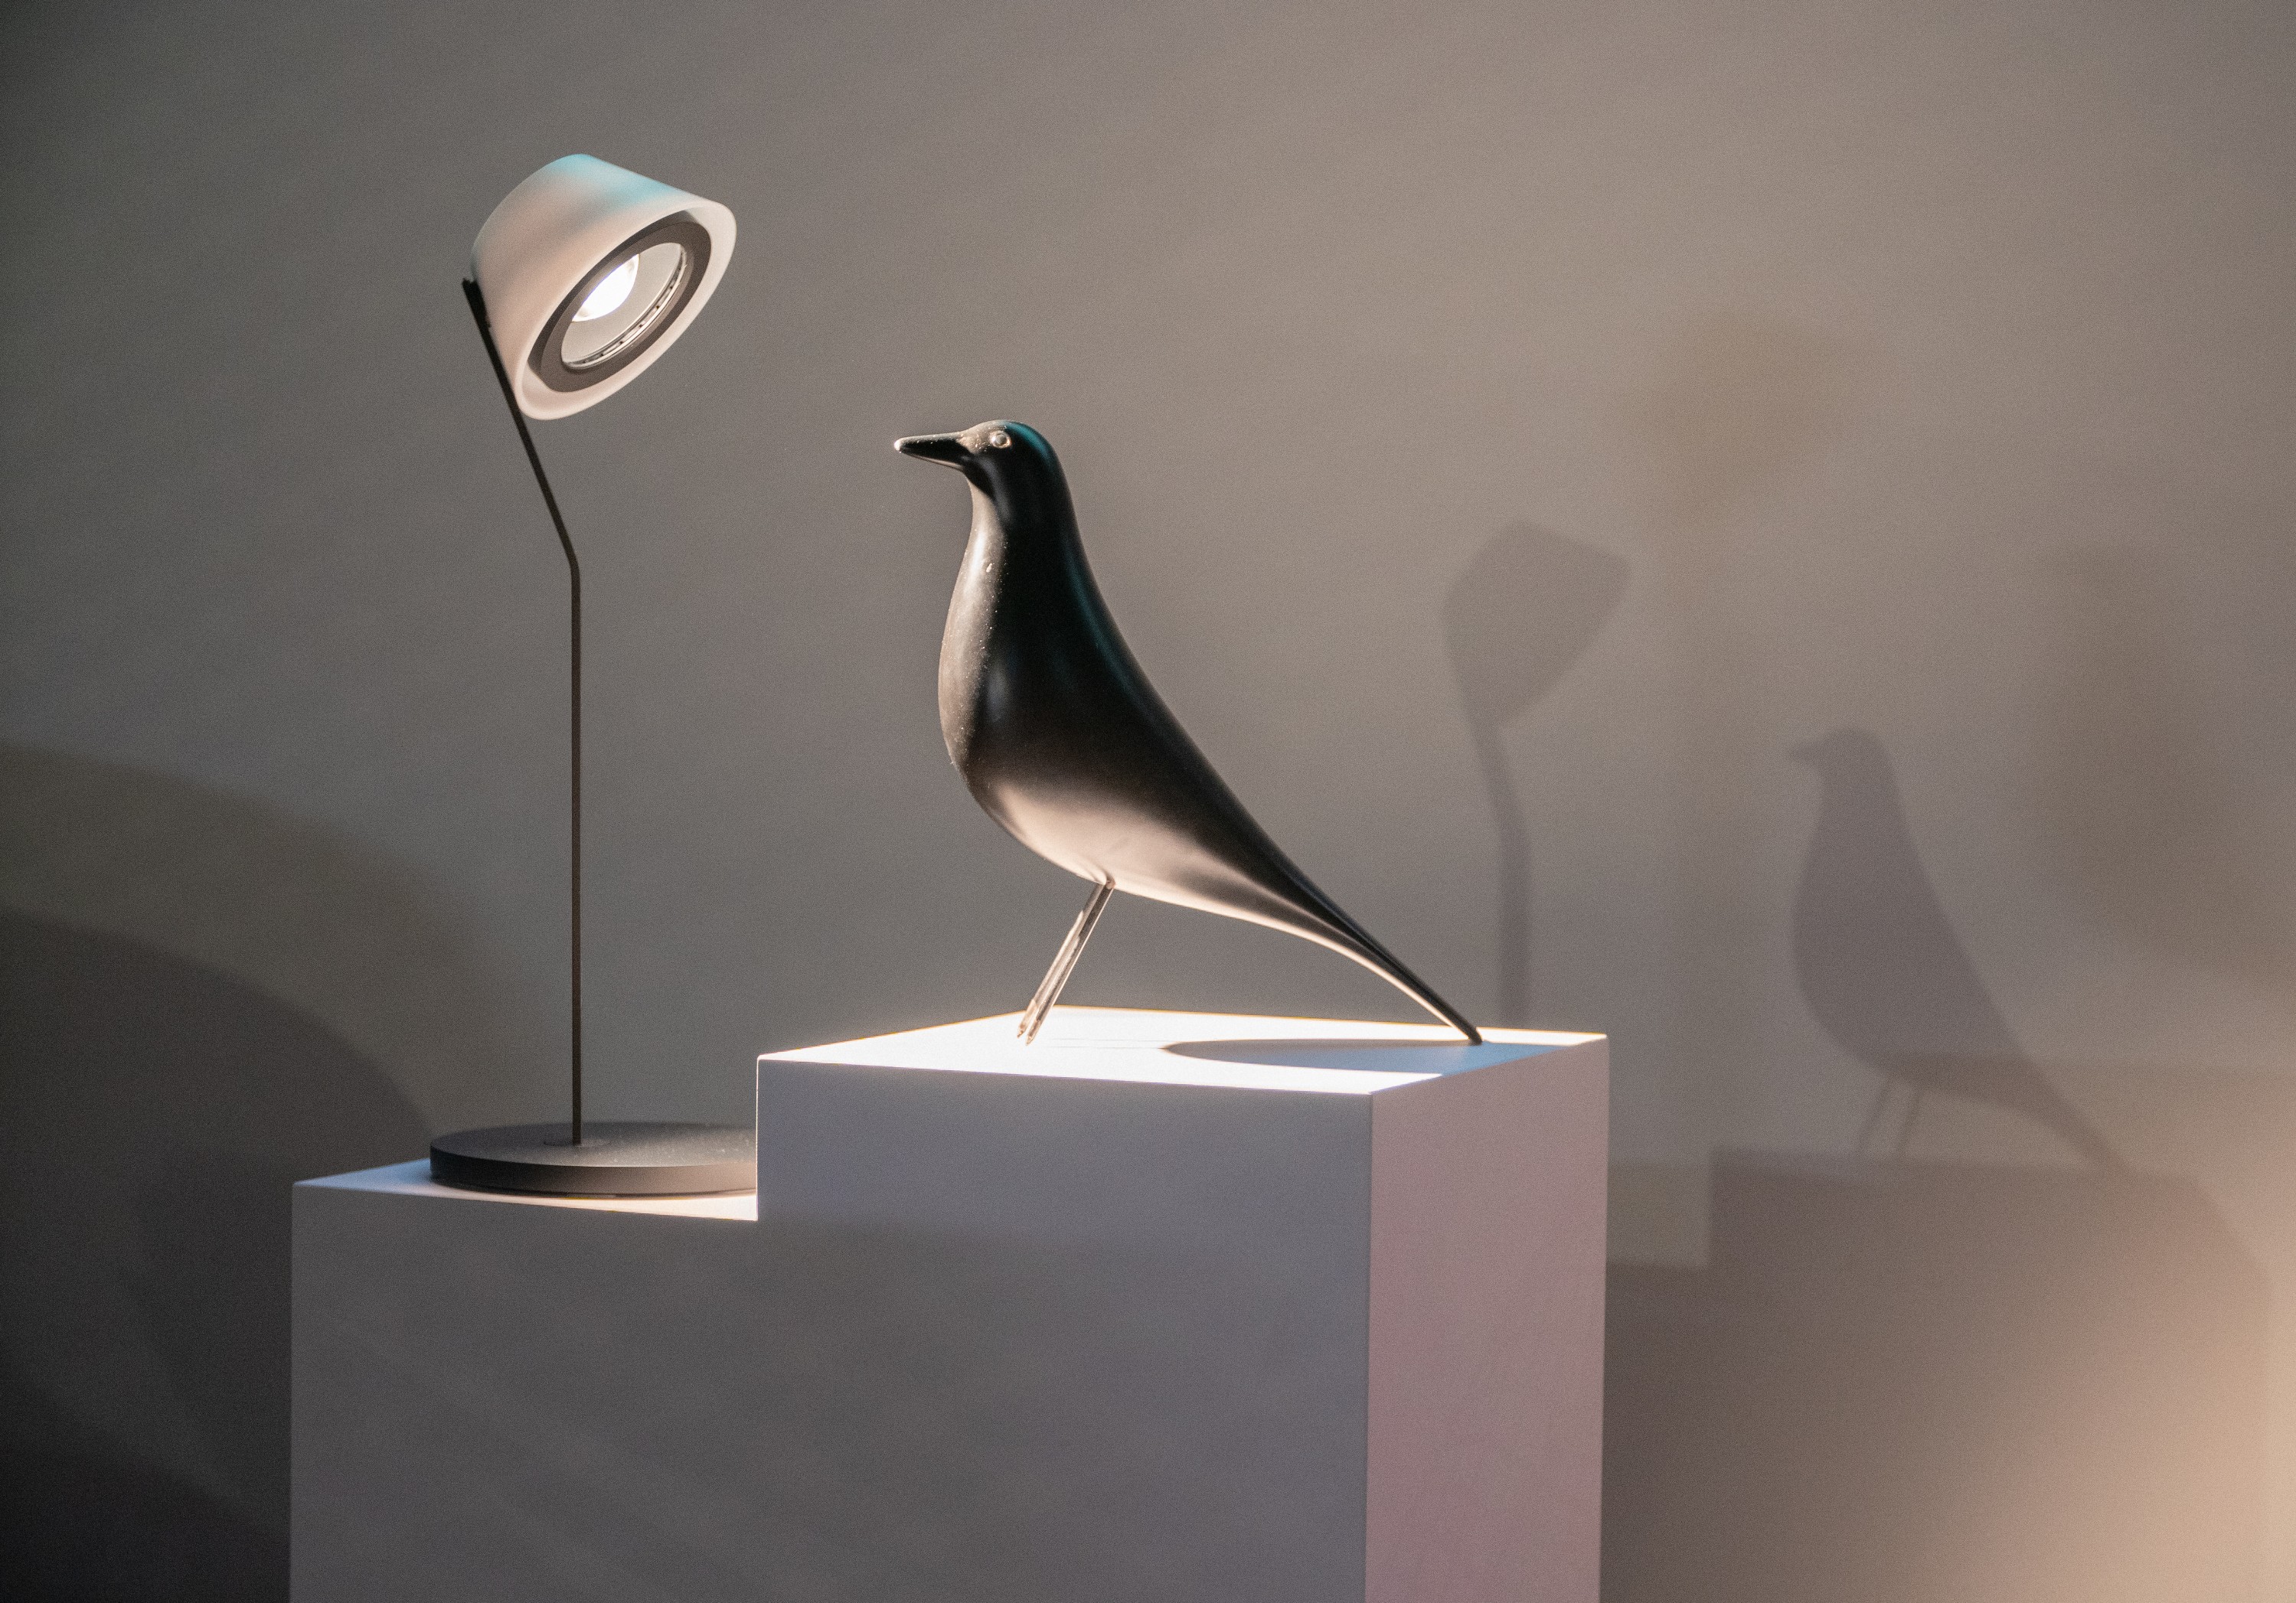 Among others exhibited: The Eames House Bird by Vitra.